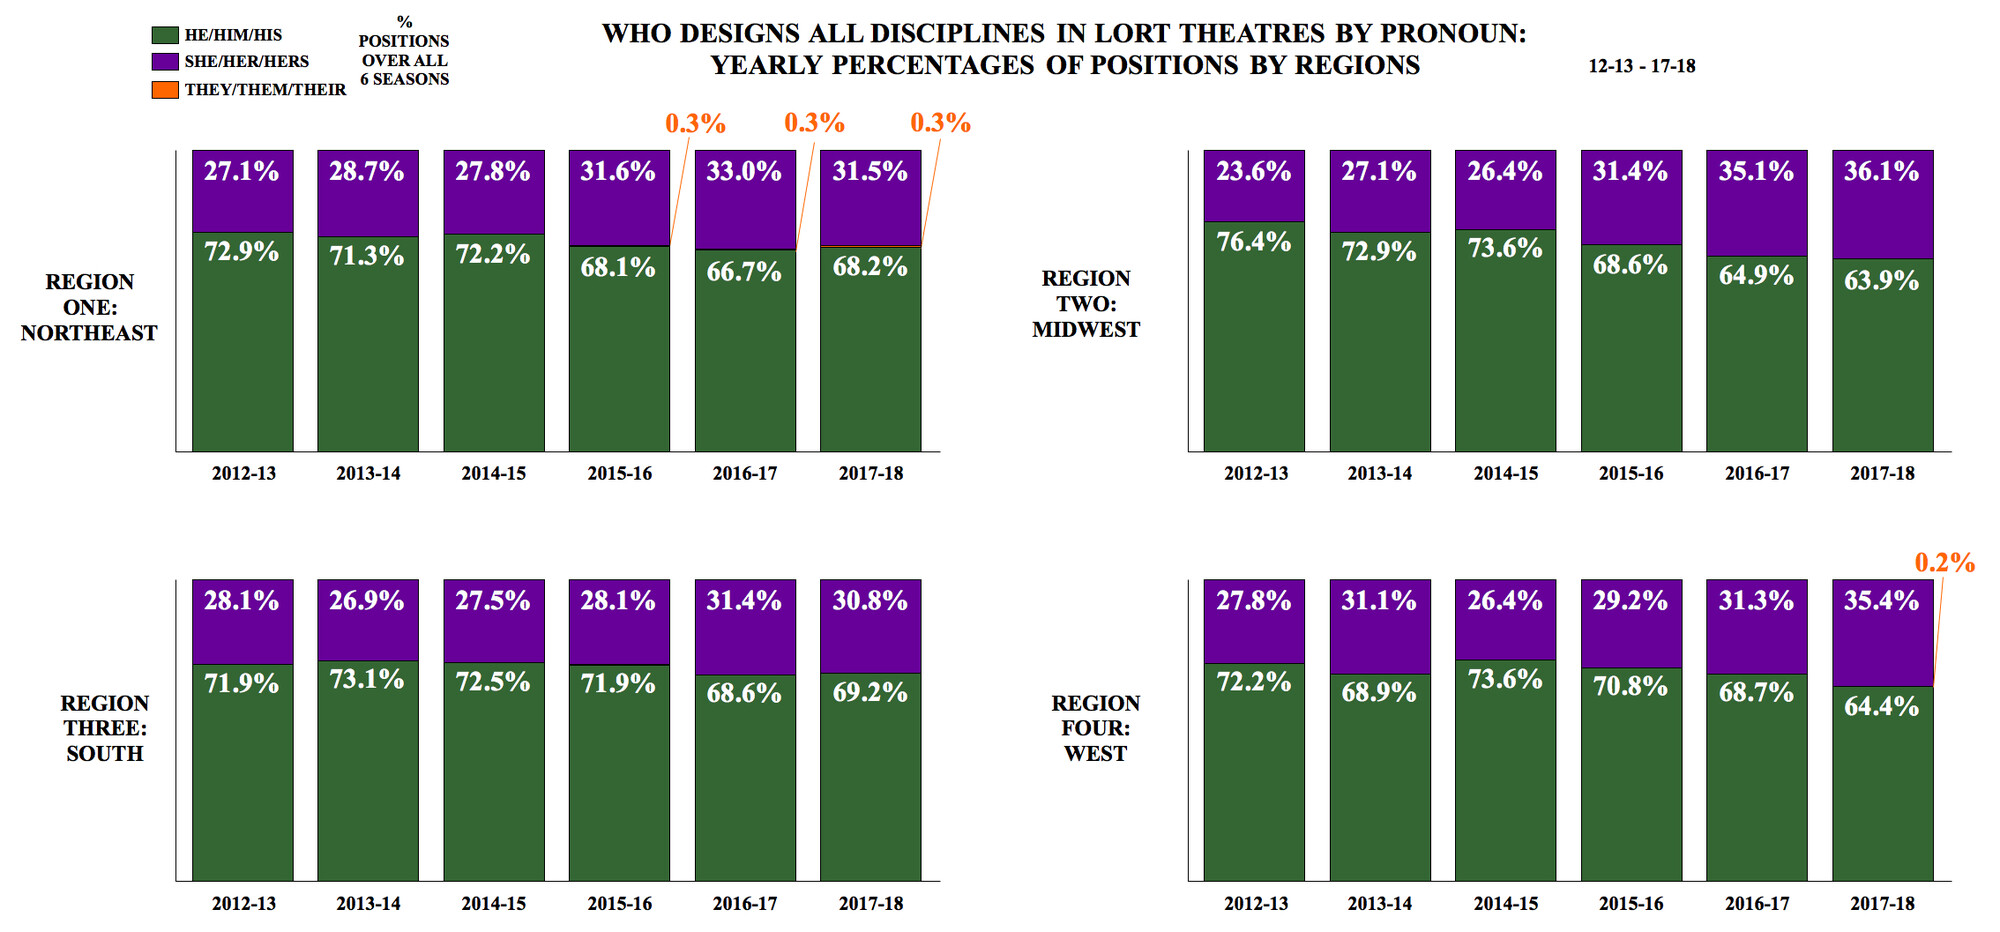 Who Designs All Disciplines in LORT Theatres by Pronoun: Yearly Percentages of Positions by Regions